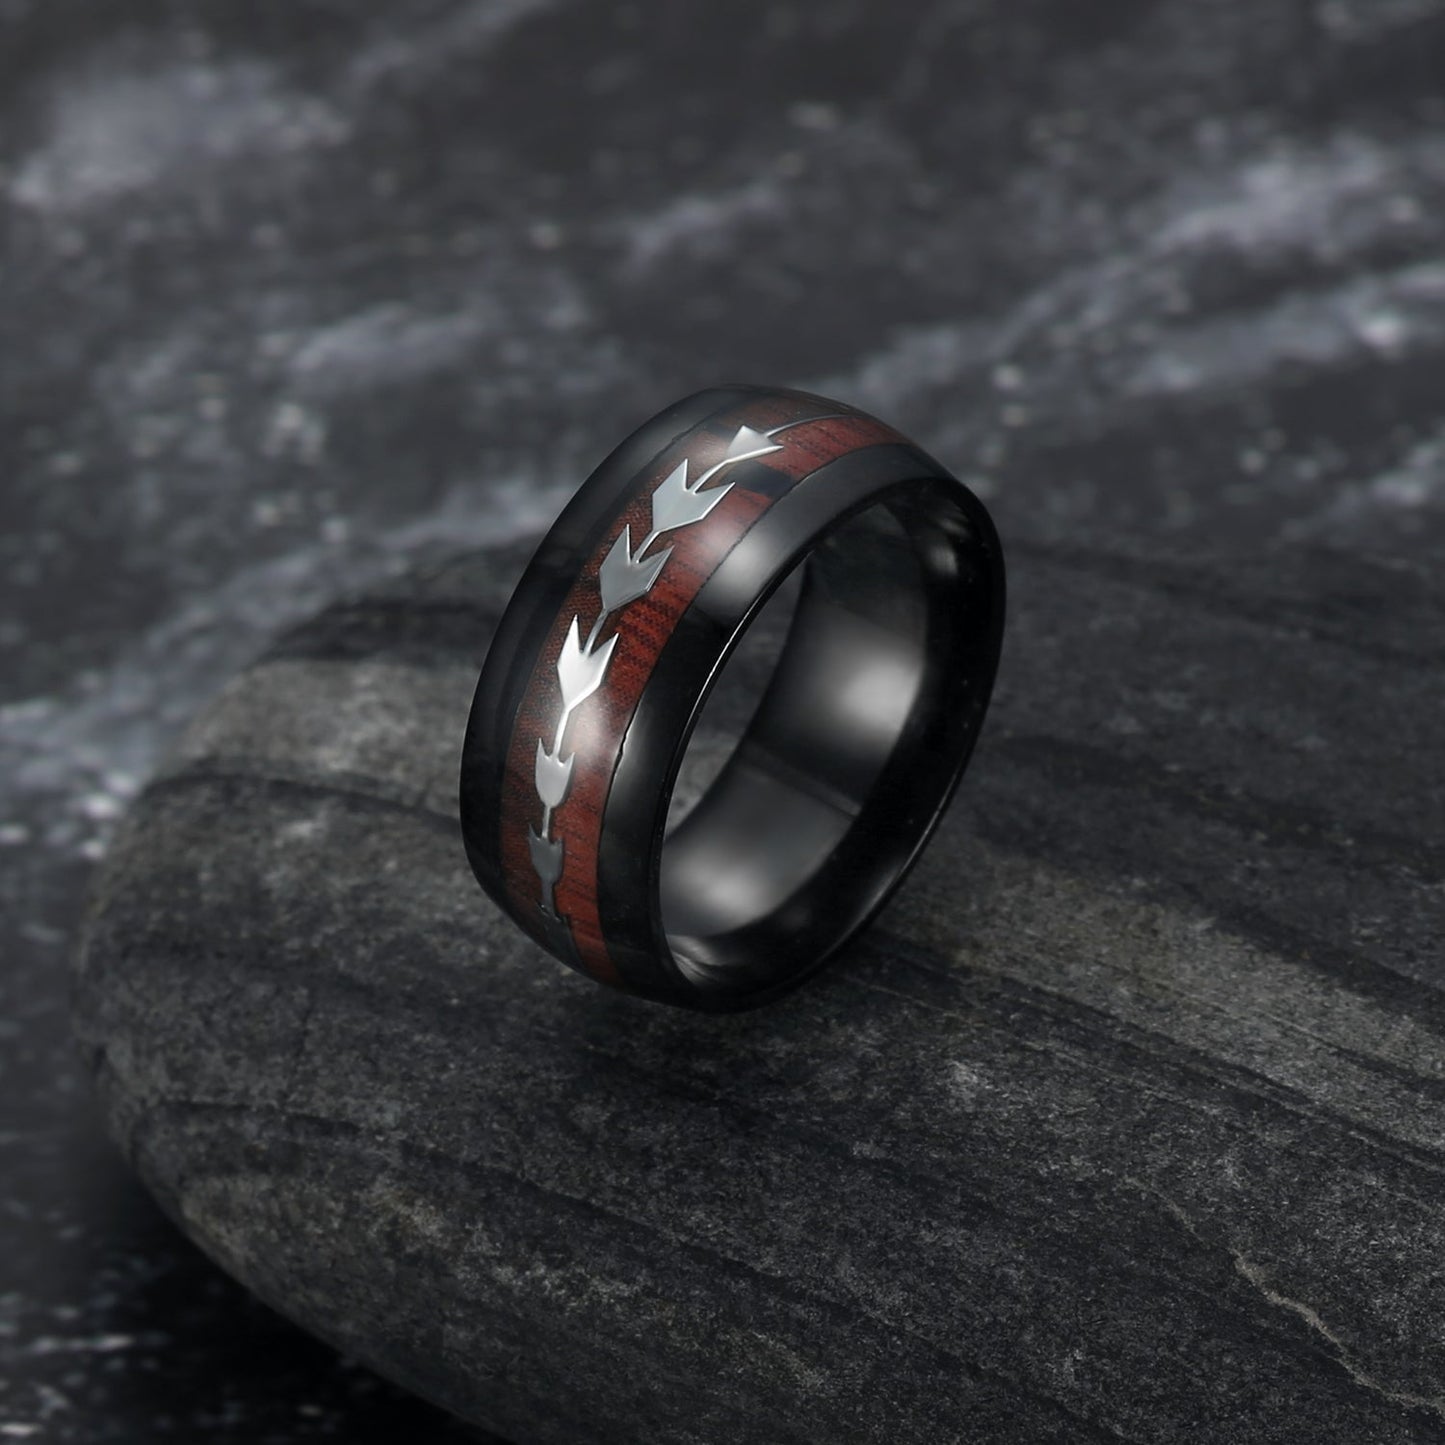 Nordic Pride Tungsten Wedding Ring With Wood and Arrow Inset